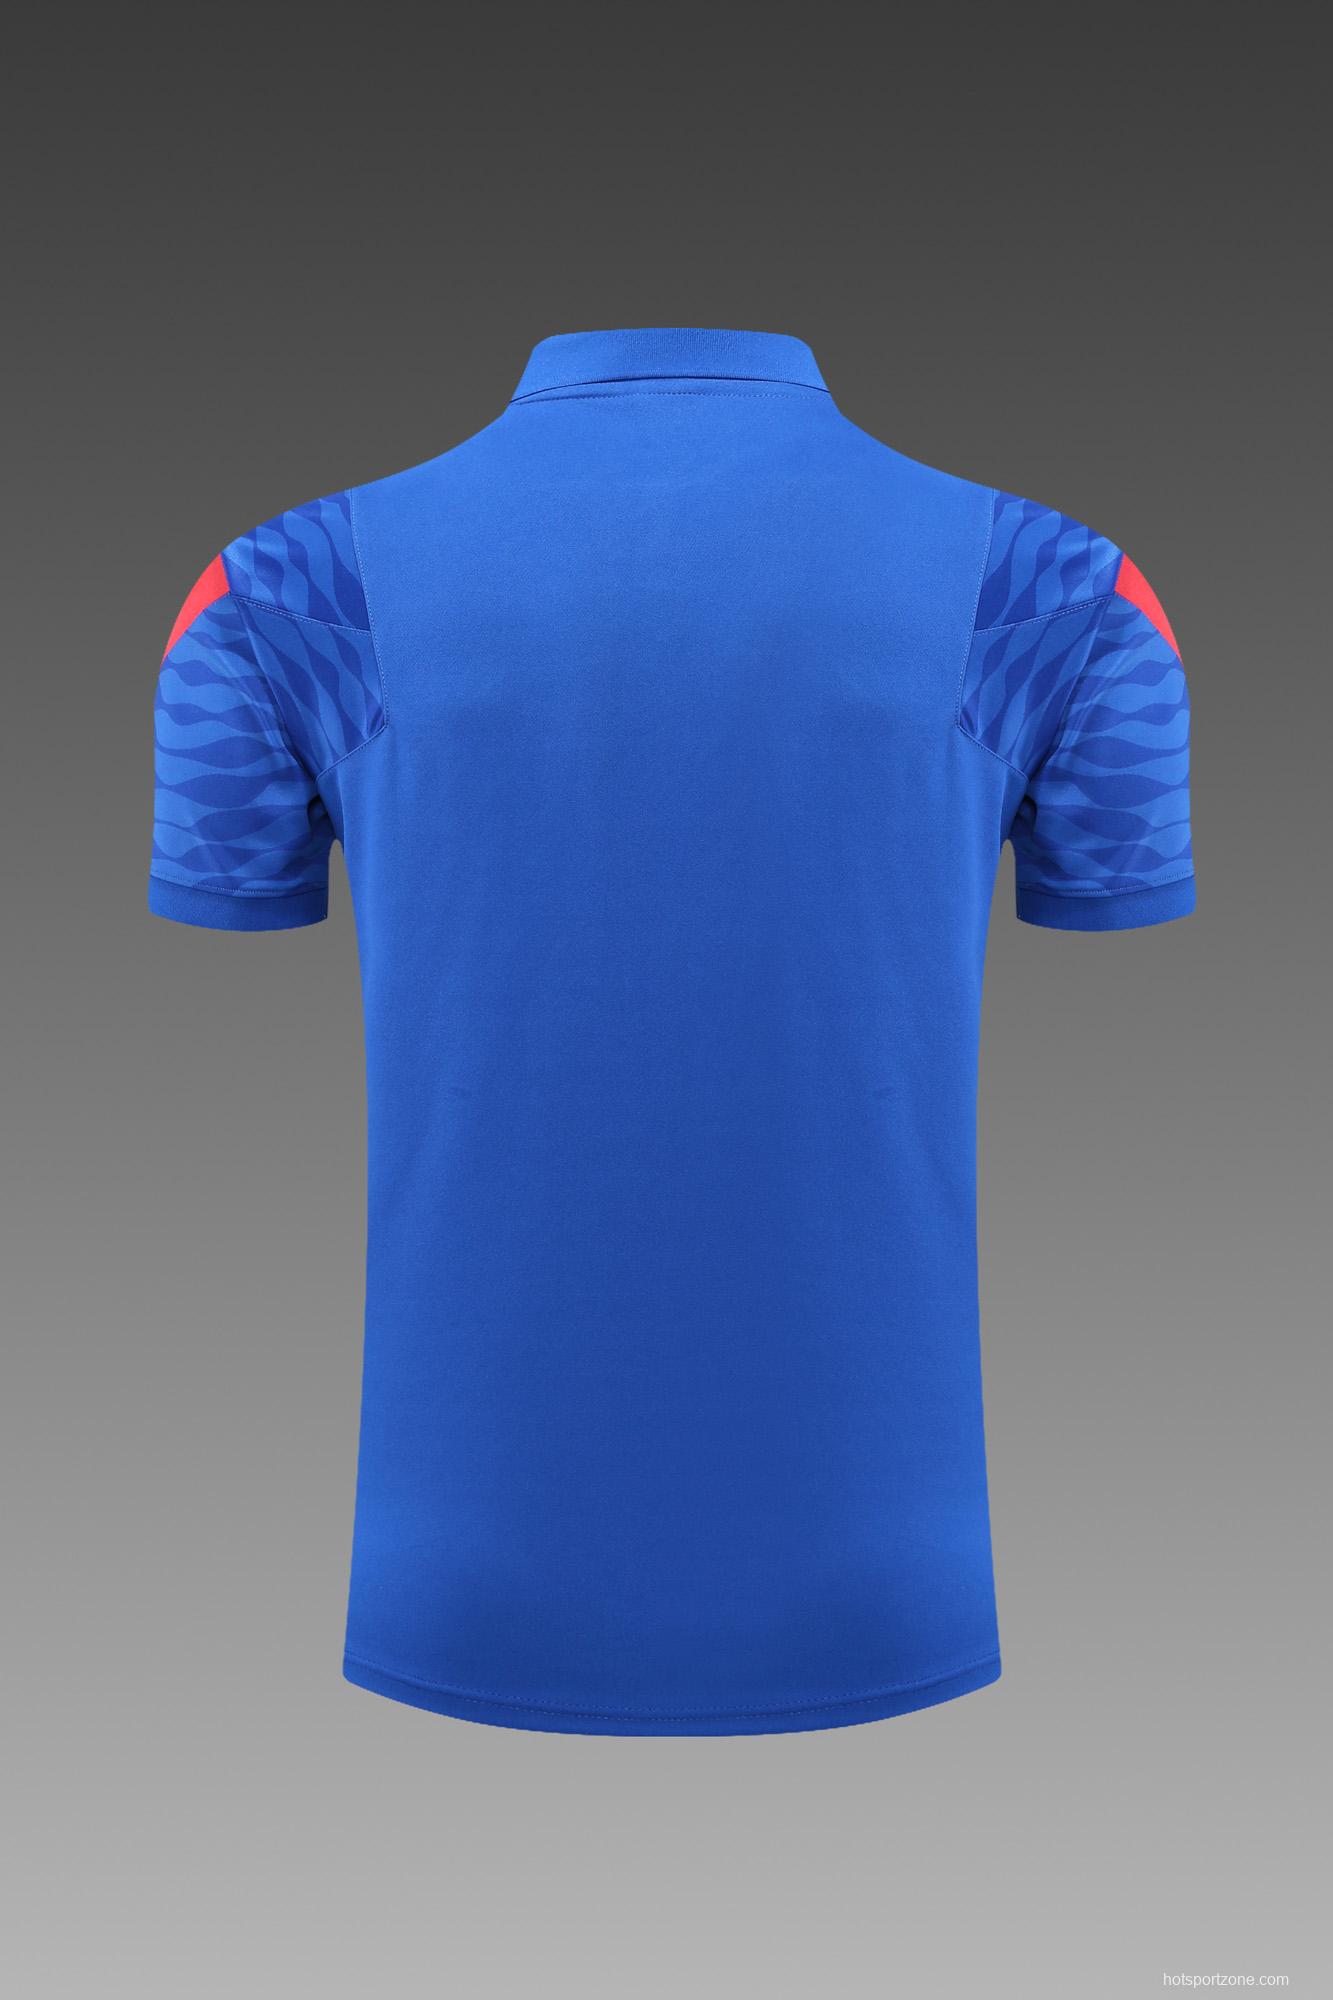 Atletico Madrid POLO kit Diamond Blue(not supported to be sold separately)